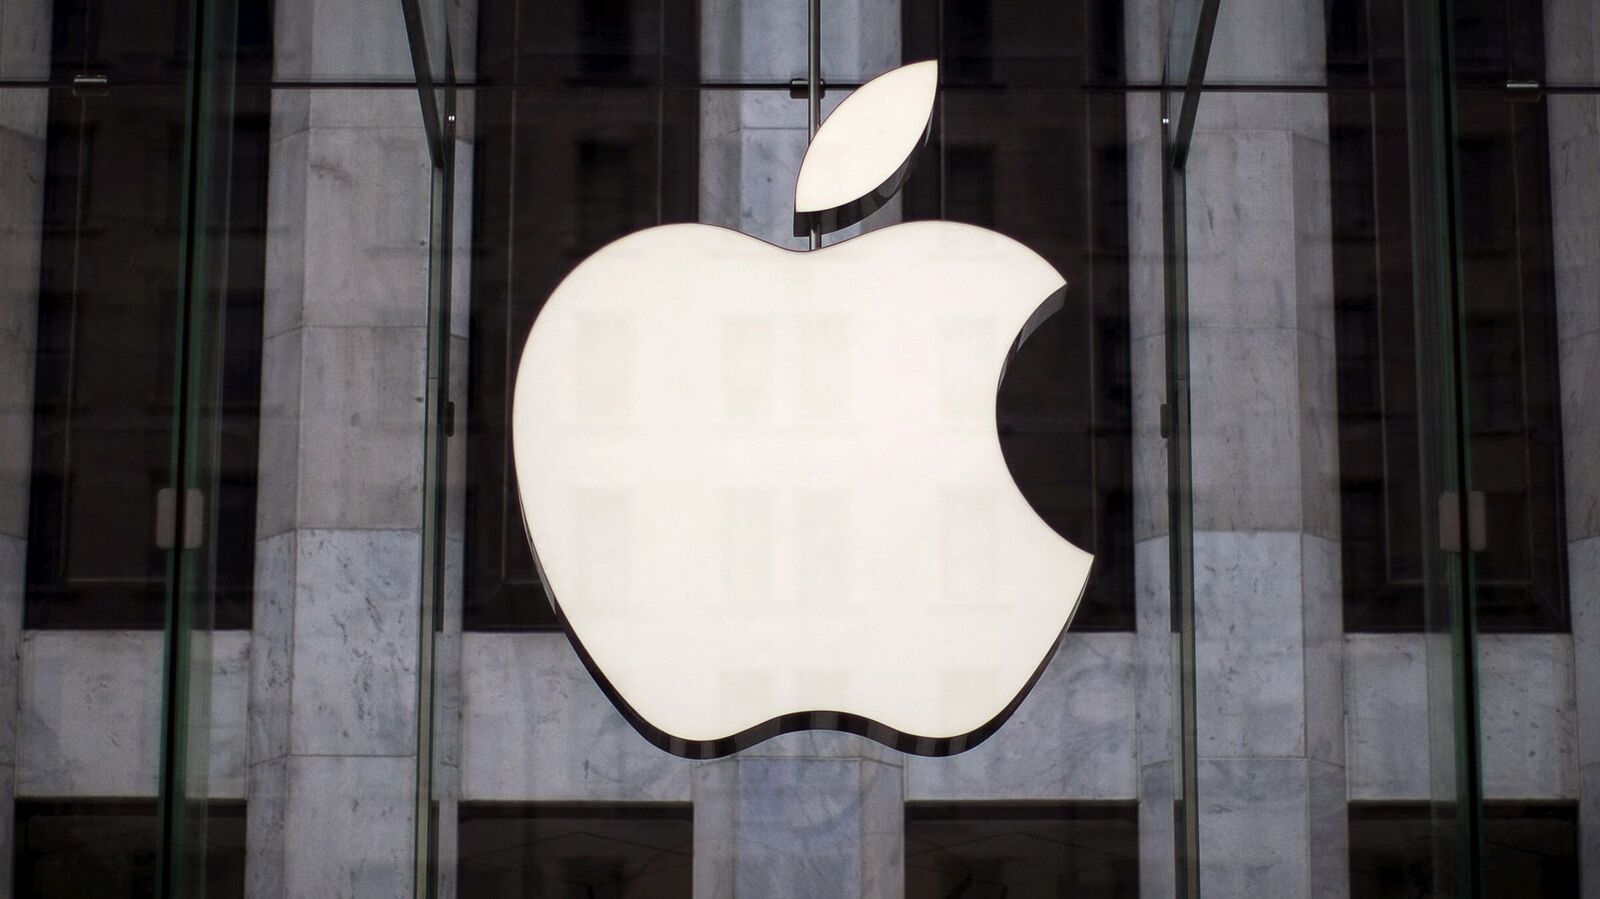 EU warns Apple of consequences if App Store changes fall short of regulations